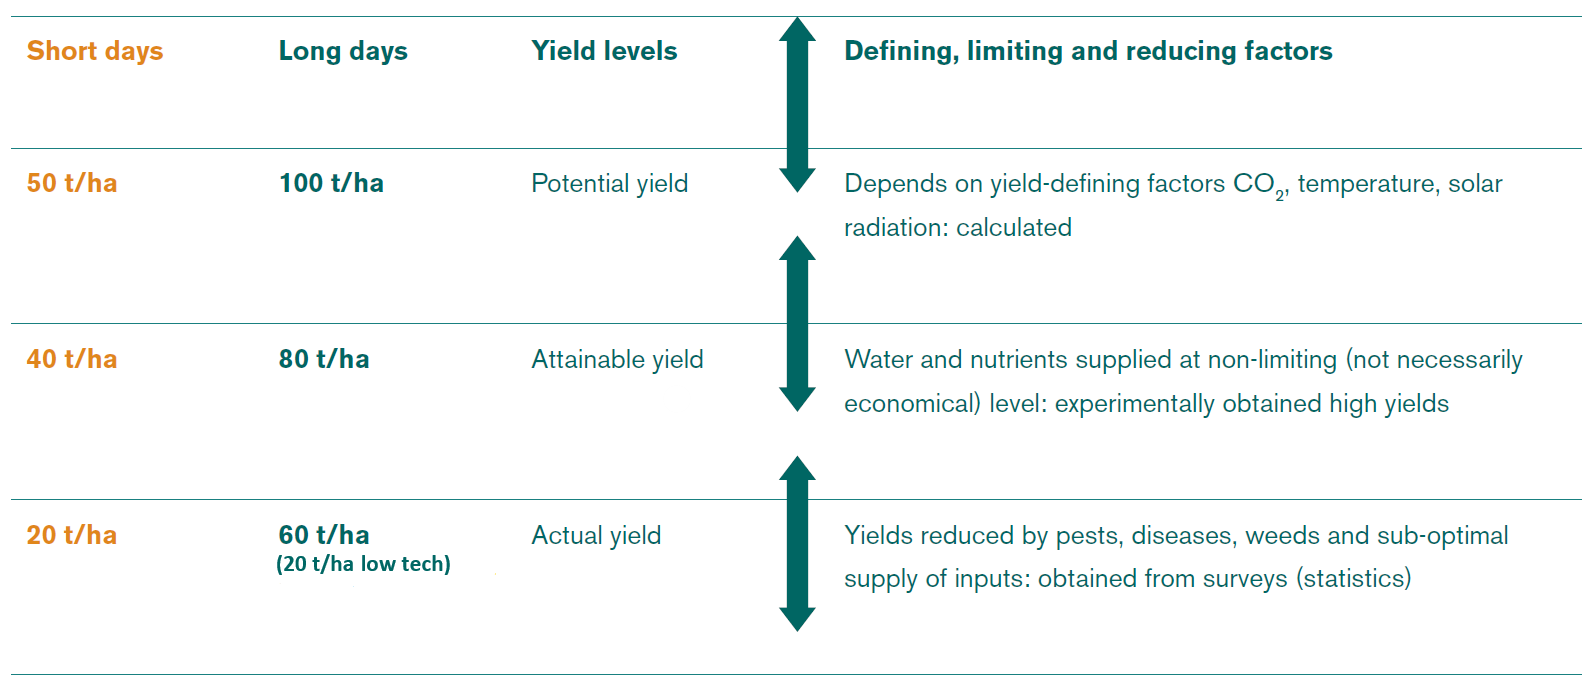    The three yield levels and factors that determine or reduce them.